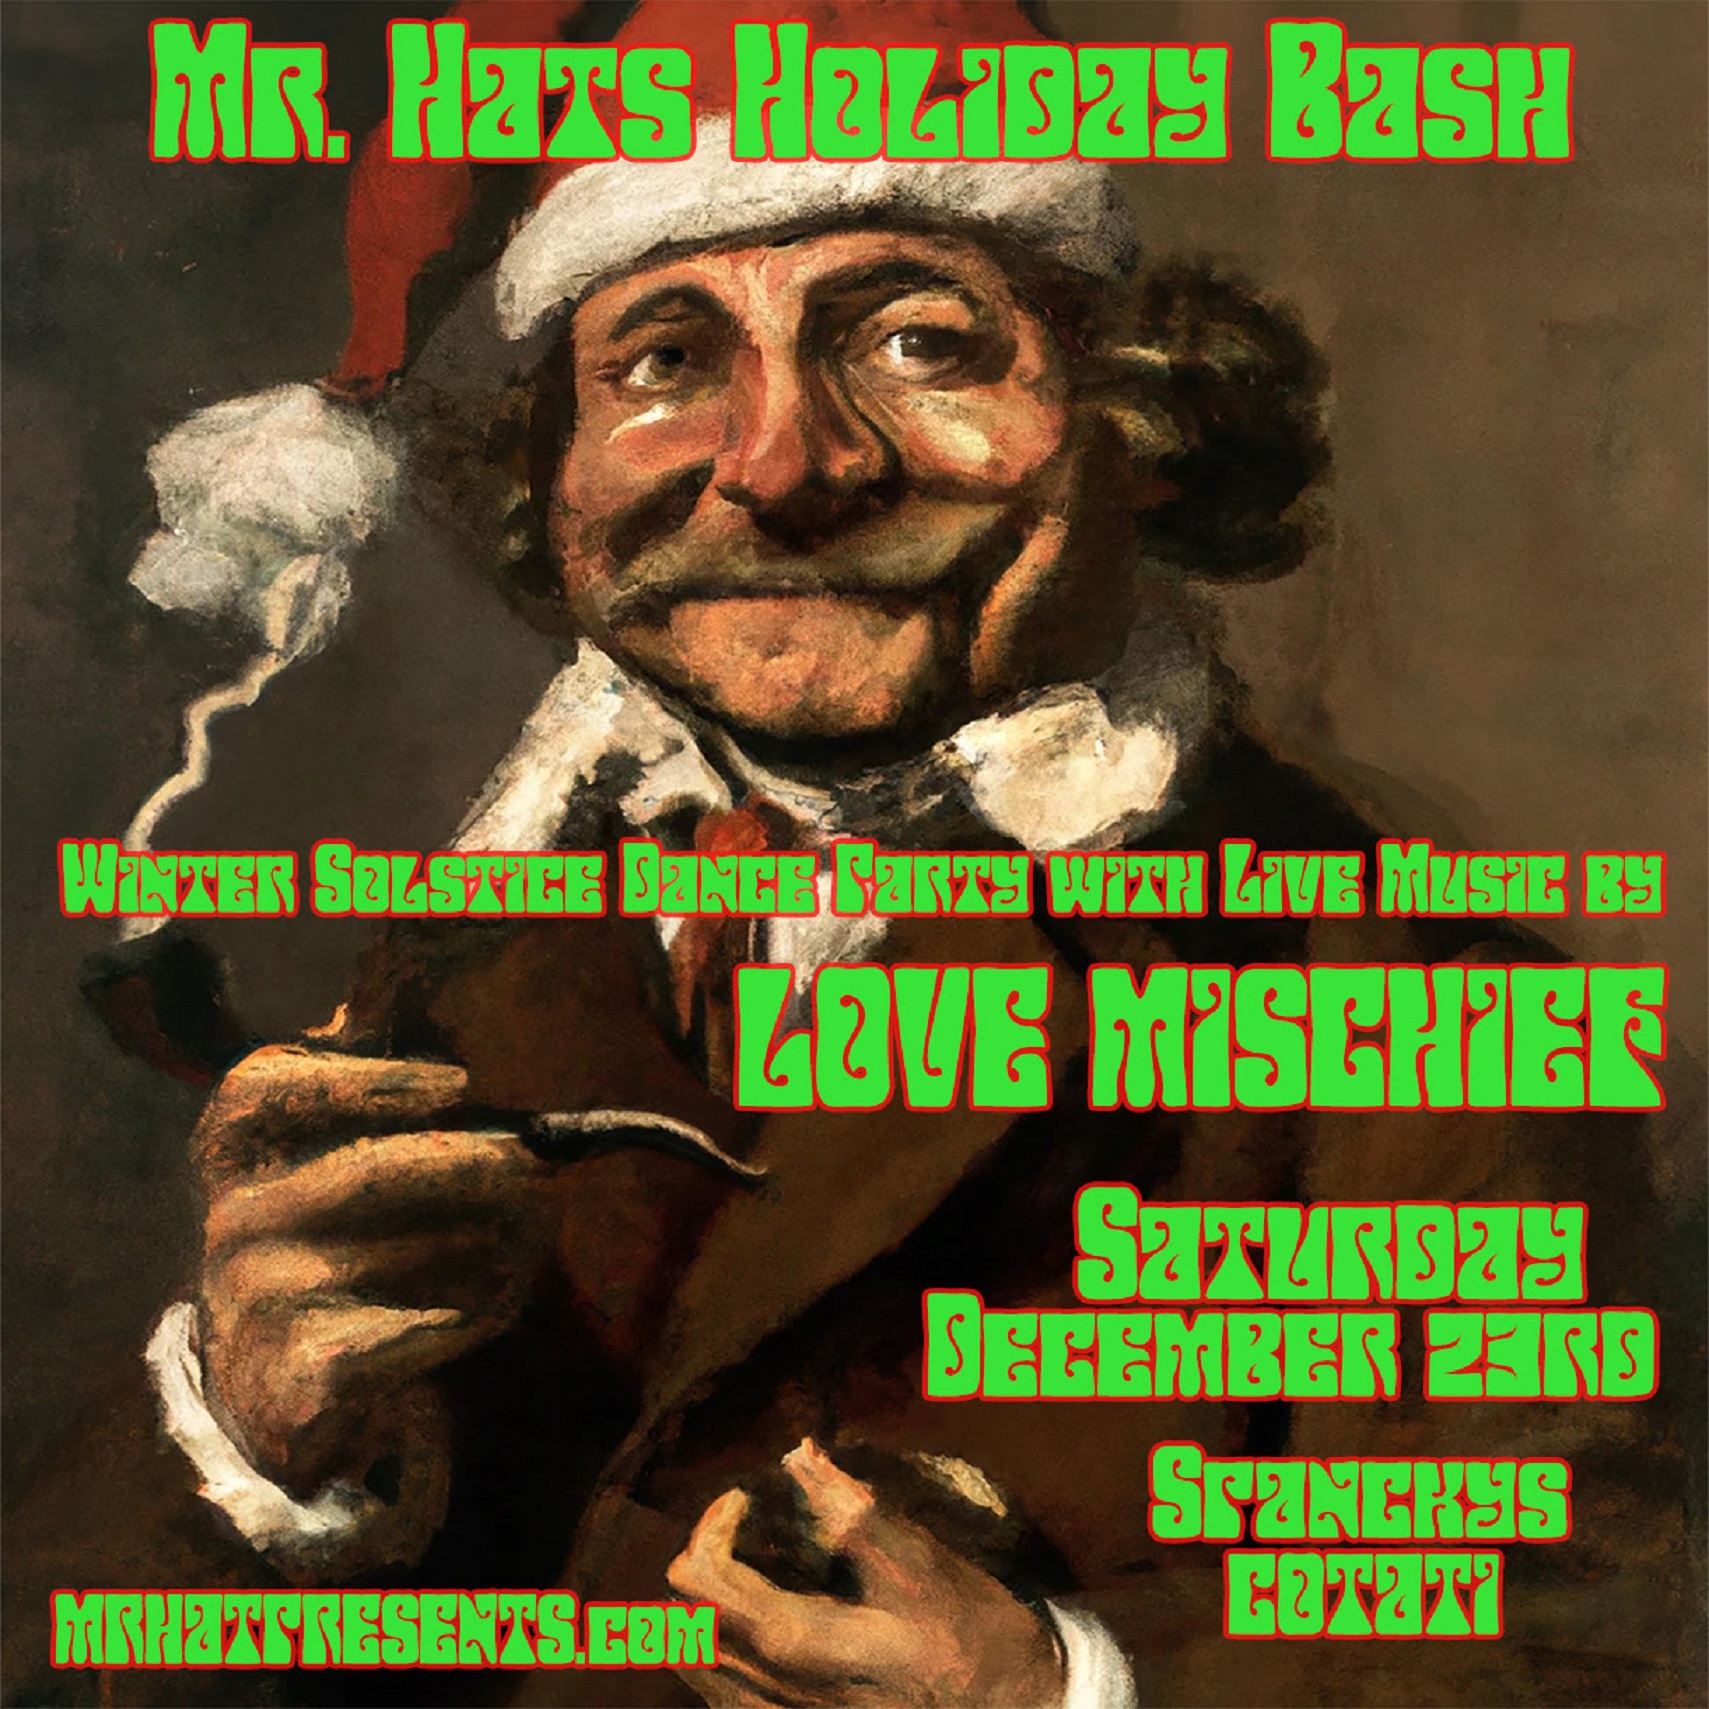 TONIGHT A Holiday Bash featuring two sets of LOVE MISCHIEF